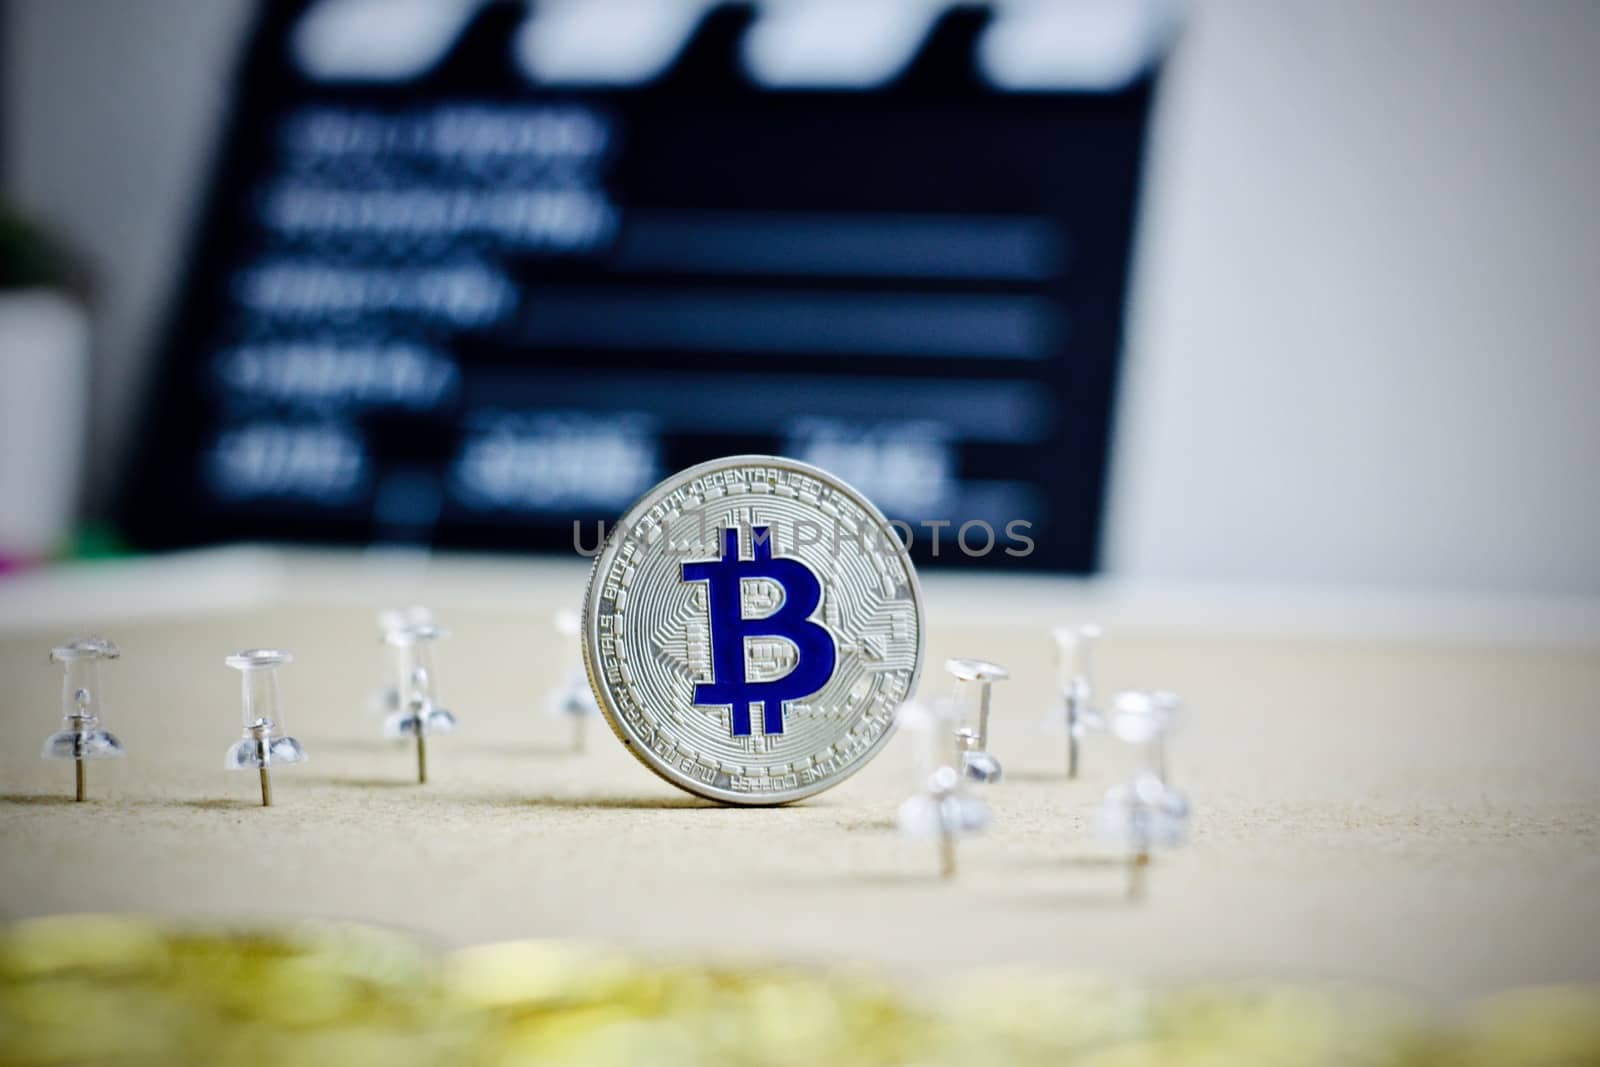 Digital currency physical metal bitcoin coin. Cryptocurrency cinema concept.